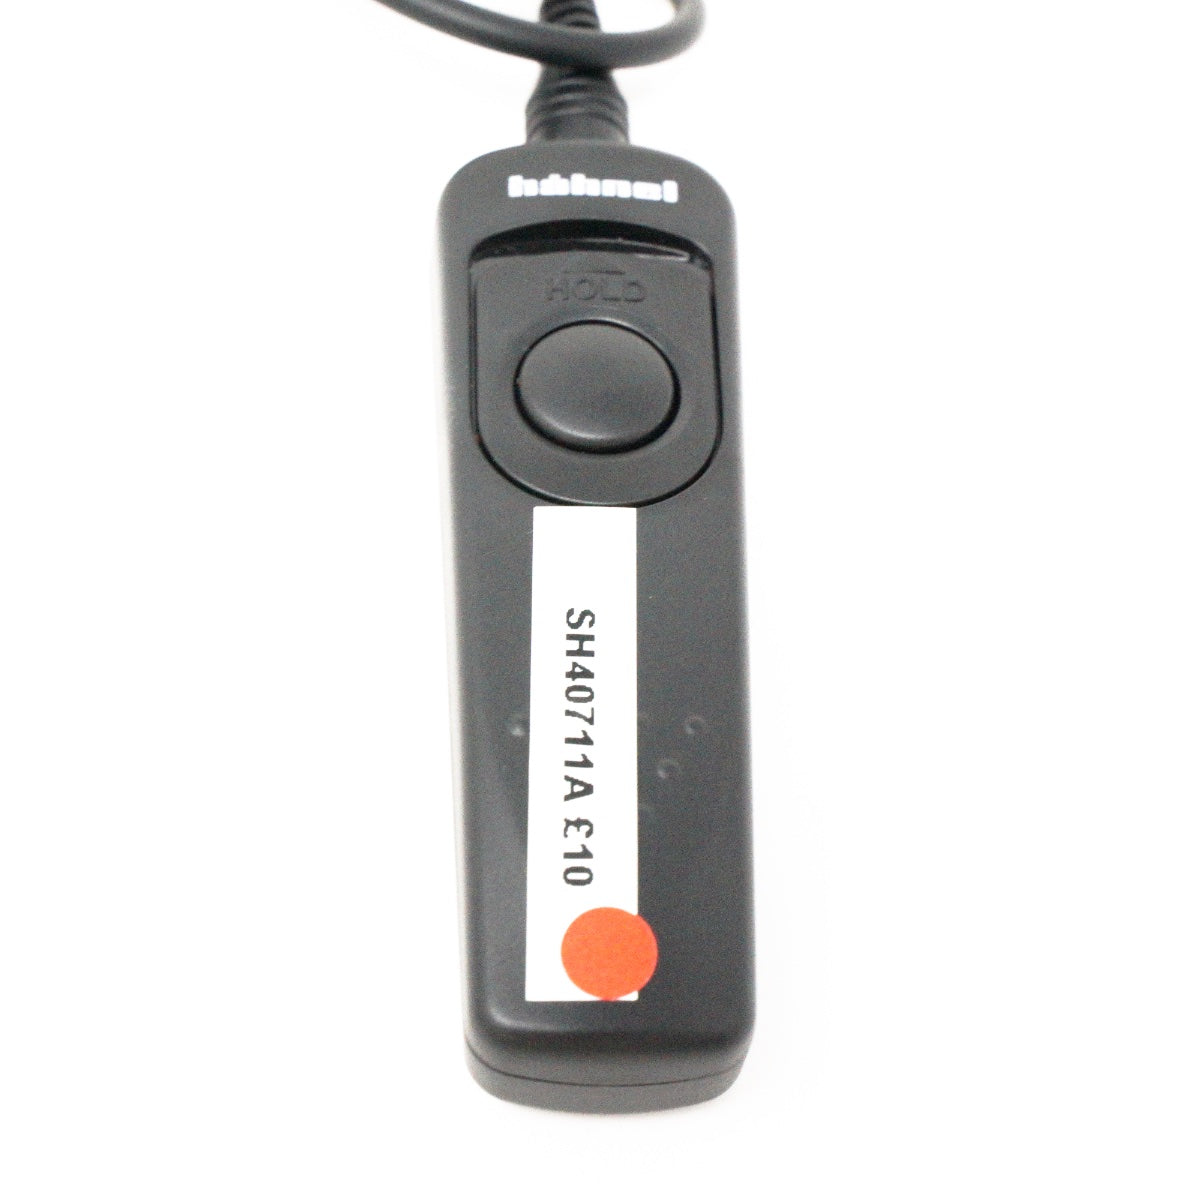 Used Hahnel Remote Shutter Release for Nikon